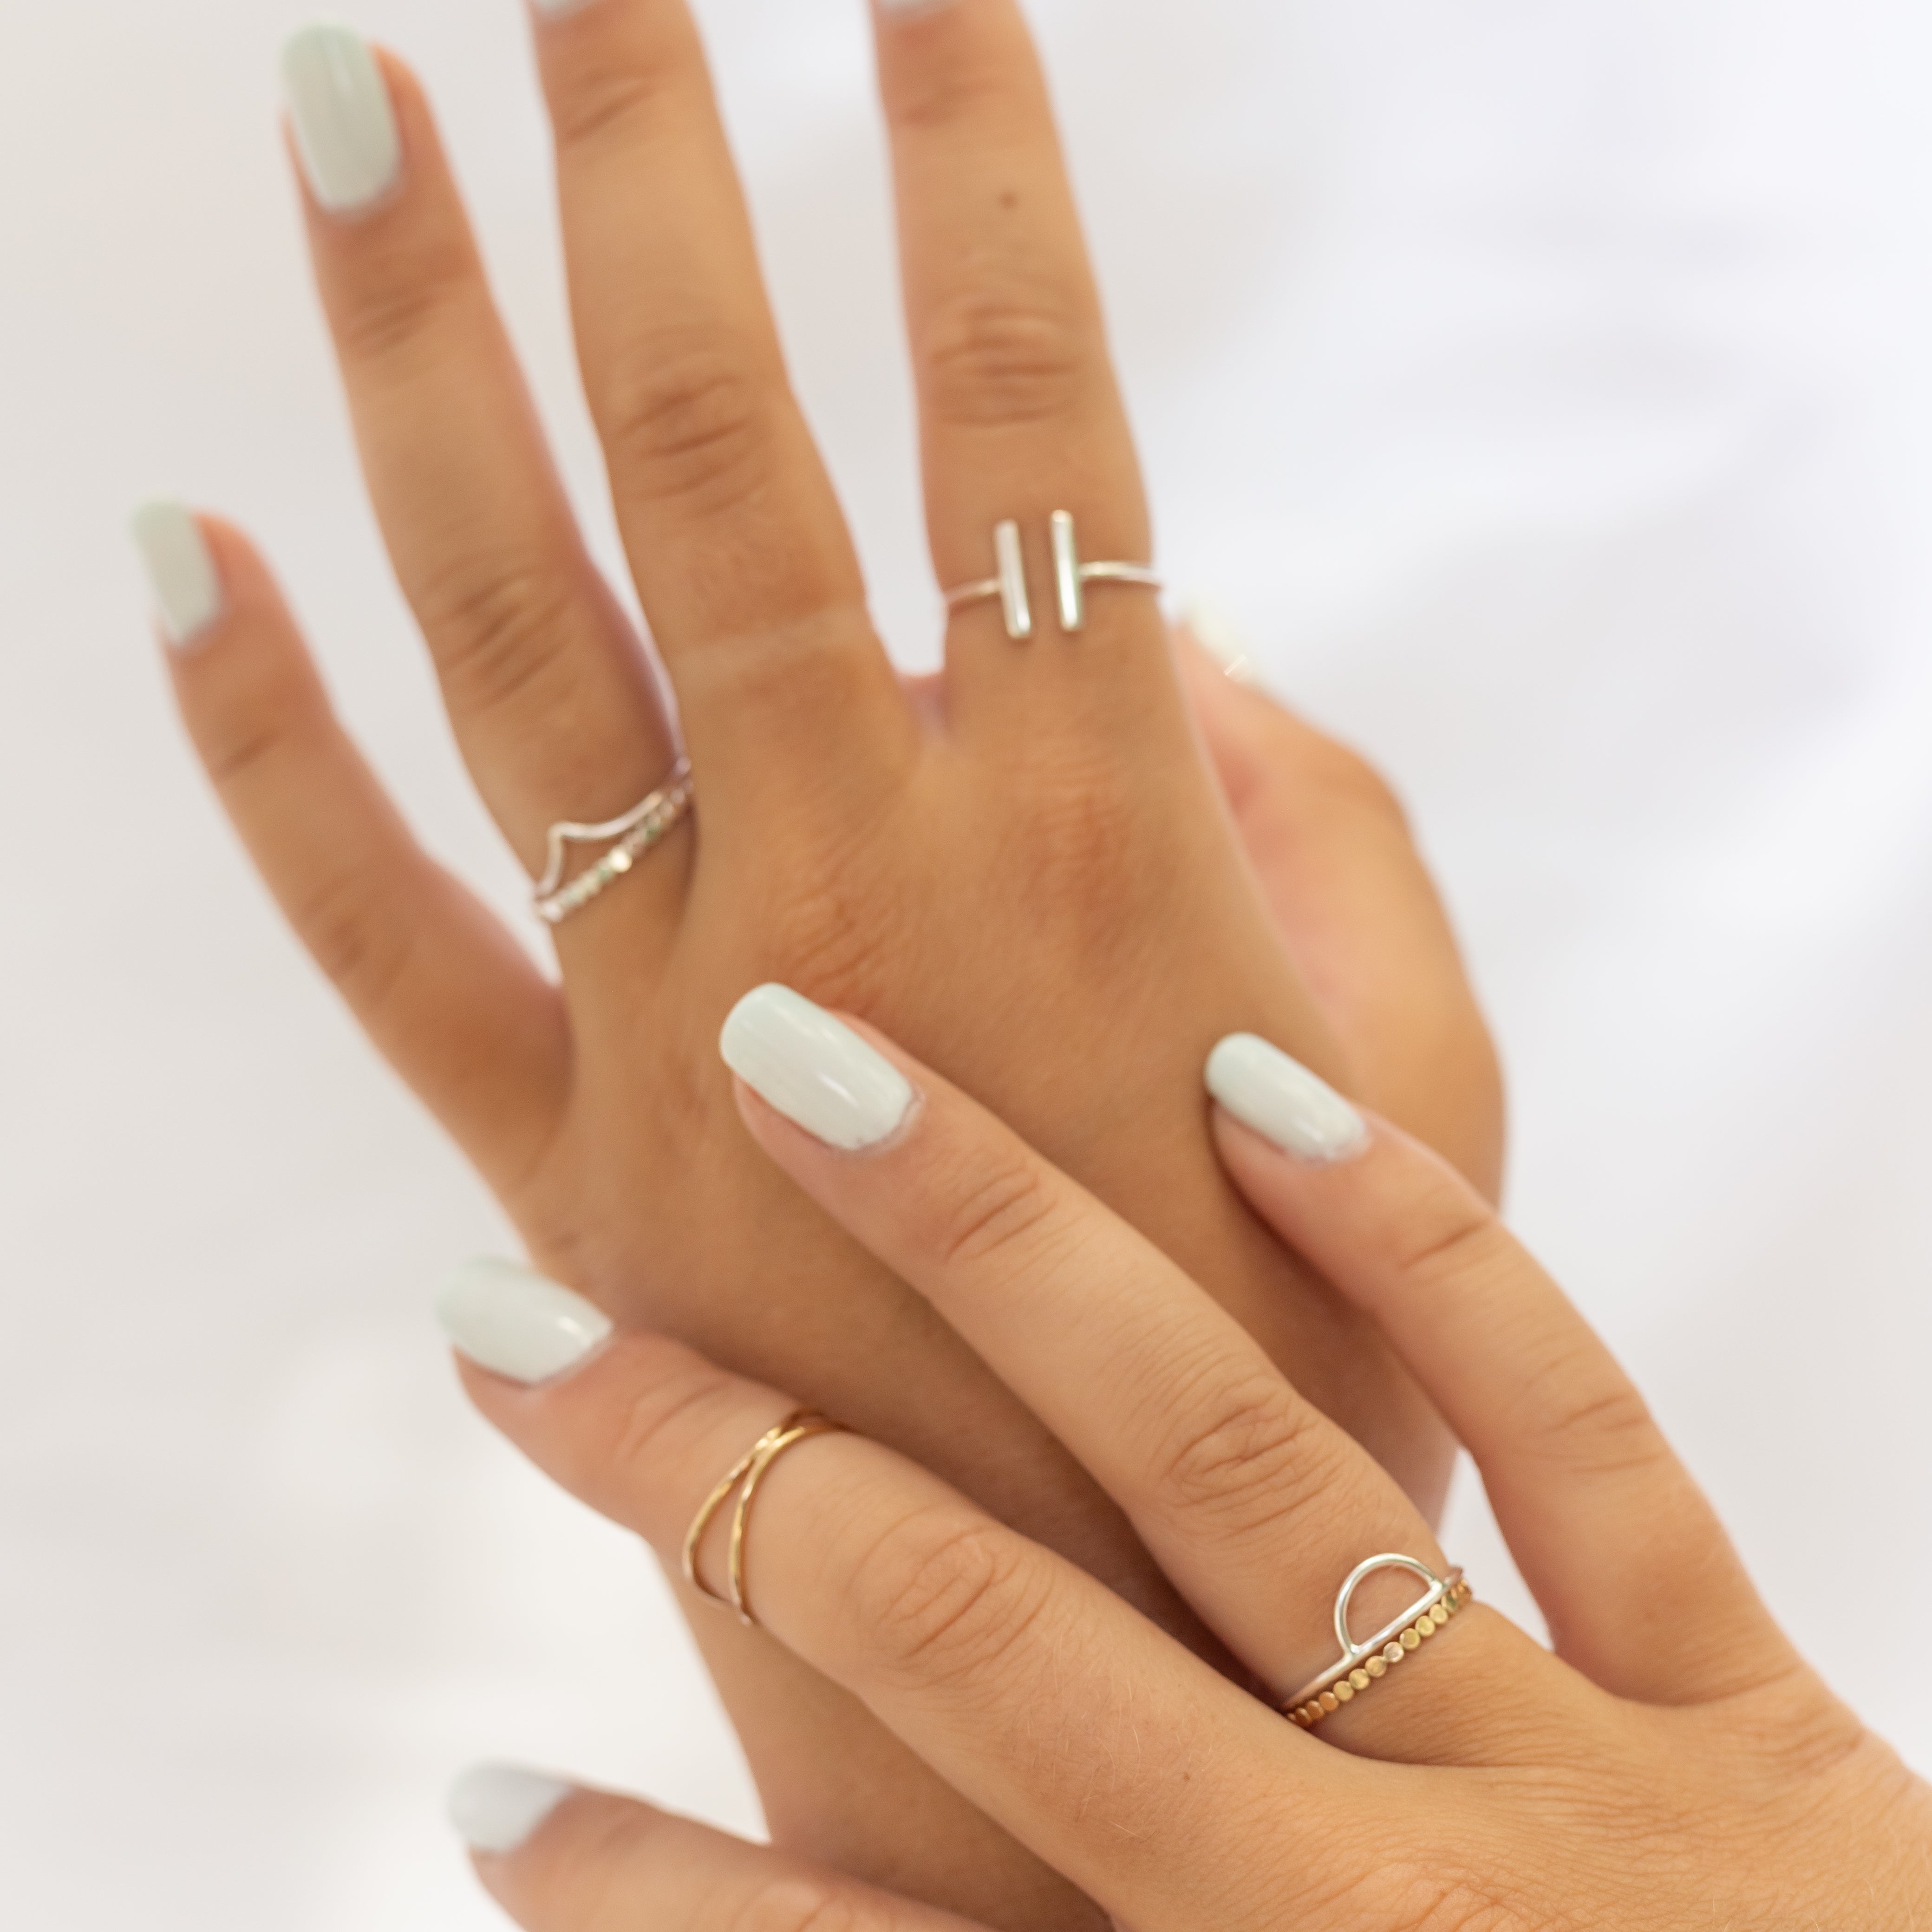 Sterling silver ring with a curve at the top, displayed on a woman's hand with several other rings